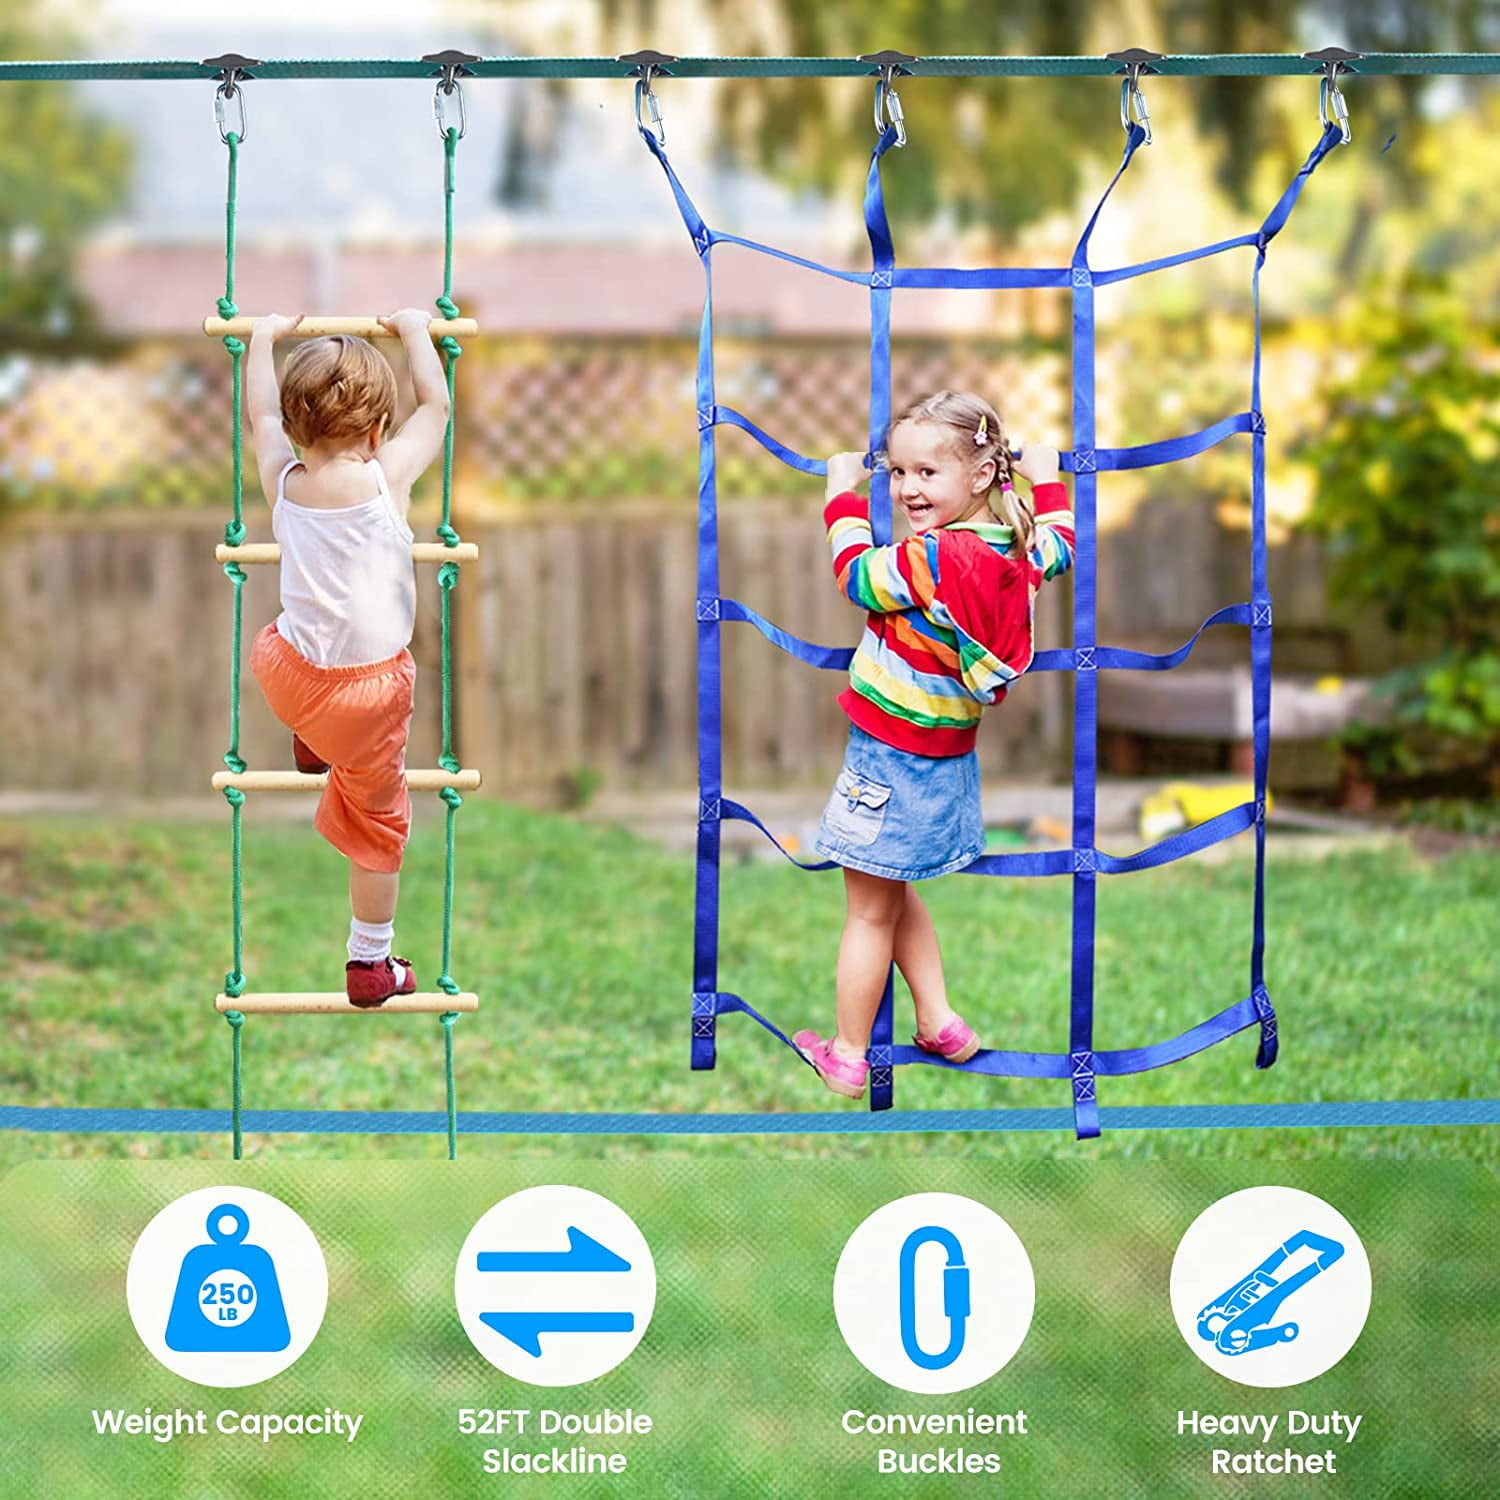 Rope Ladder,Climbing Bar,Ring,Outdoor Ninja Course Training Equipment Set for Backyard Just.smile Ninja Slackline Ninja Warrior Obstacle Course for Kids-2x52ft with Swing 